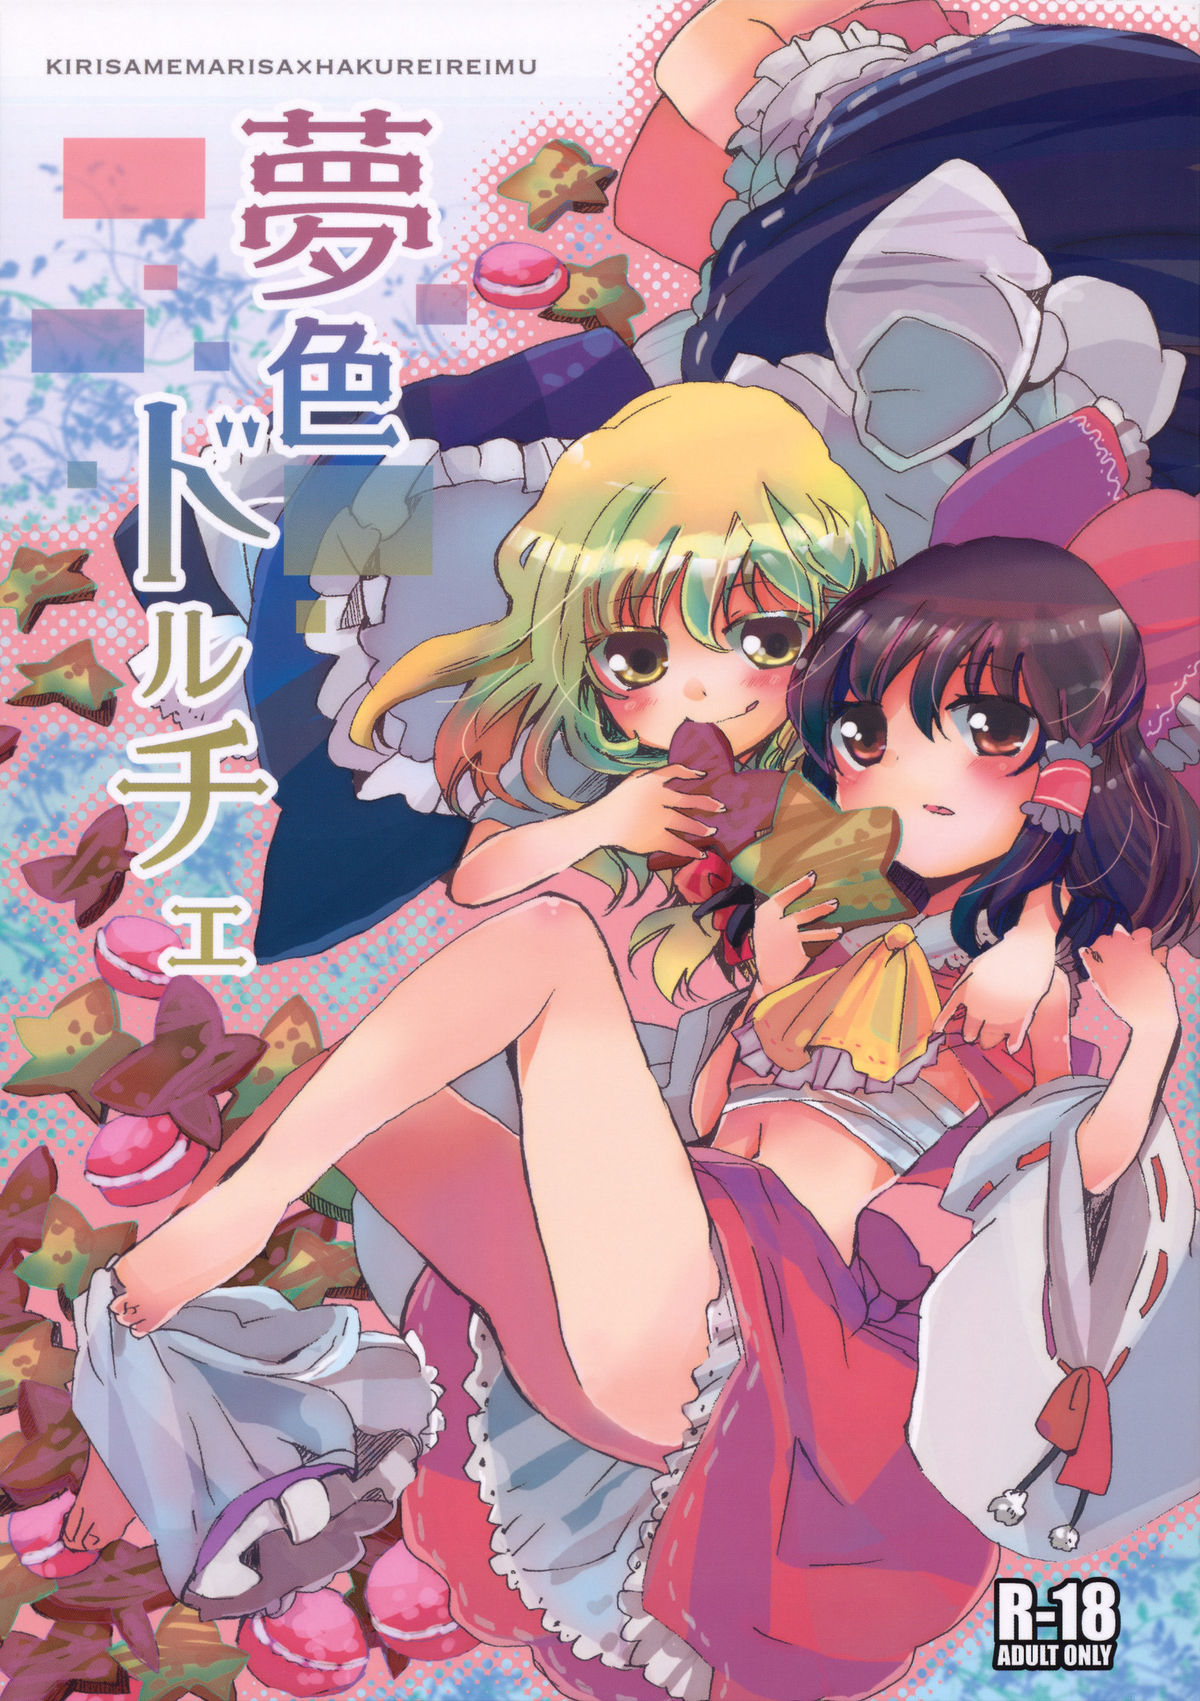 [Oimoto] Yumeiro Dolce (Touhou Project) (同人誌) [おいもと] 夢色ドルチェ (東方)